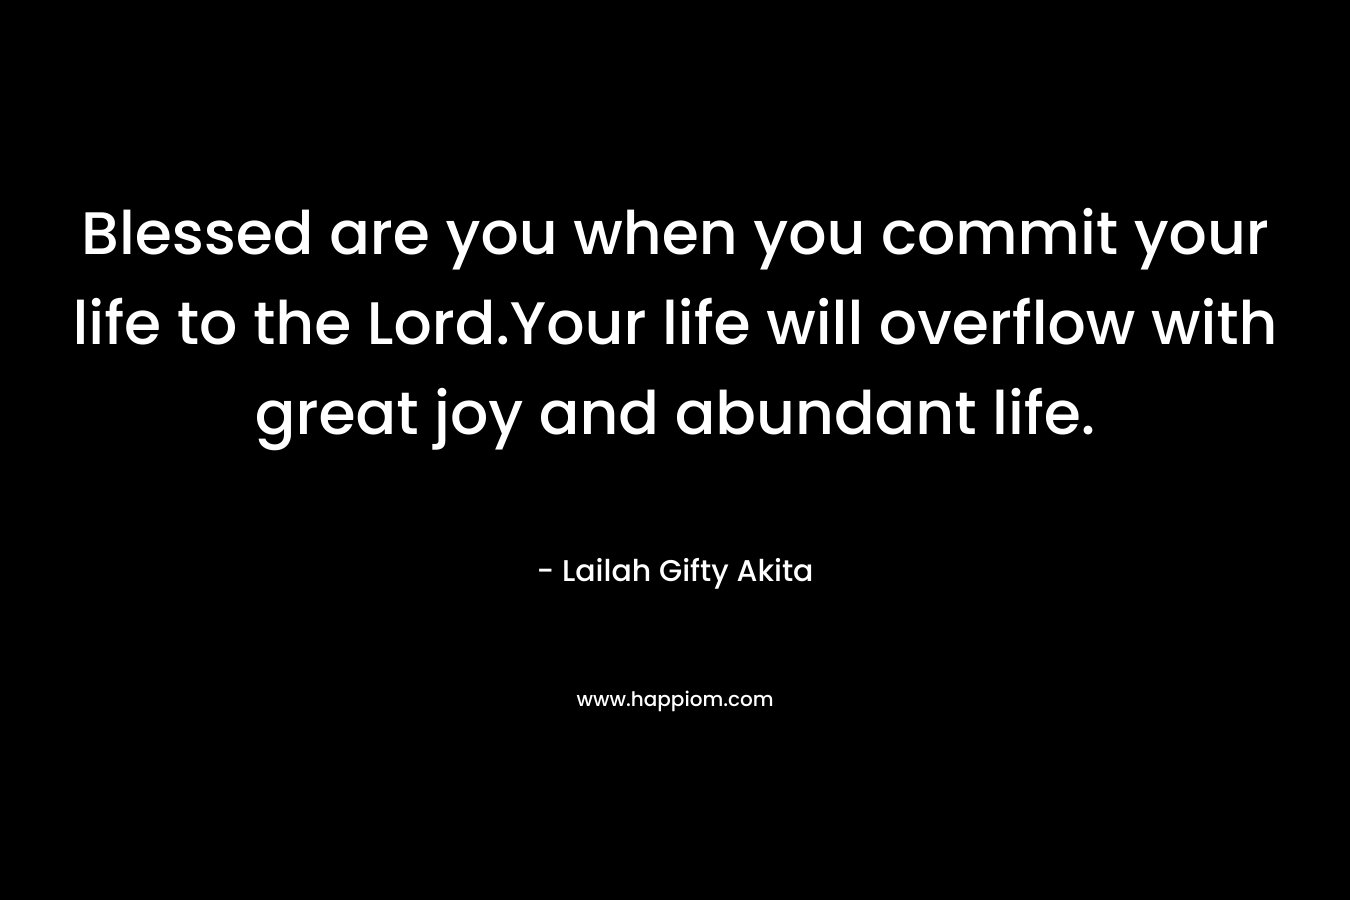 Blessed are you when you commit your life to the Lord.Your life will overflow with great joy and abundant life.